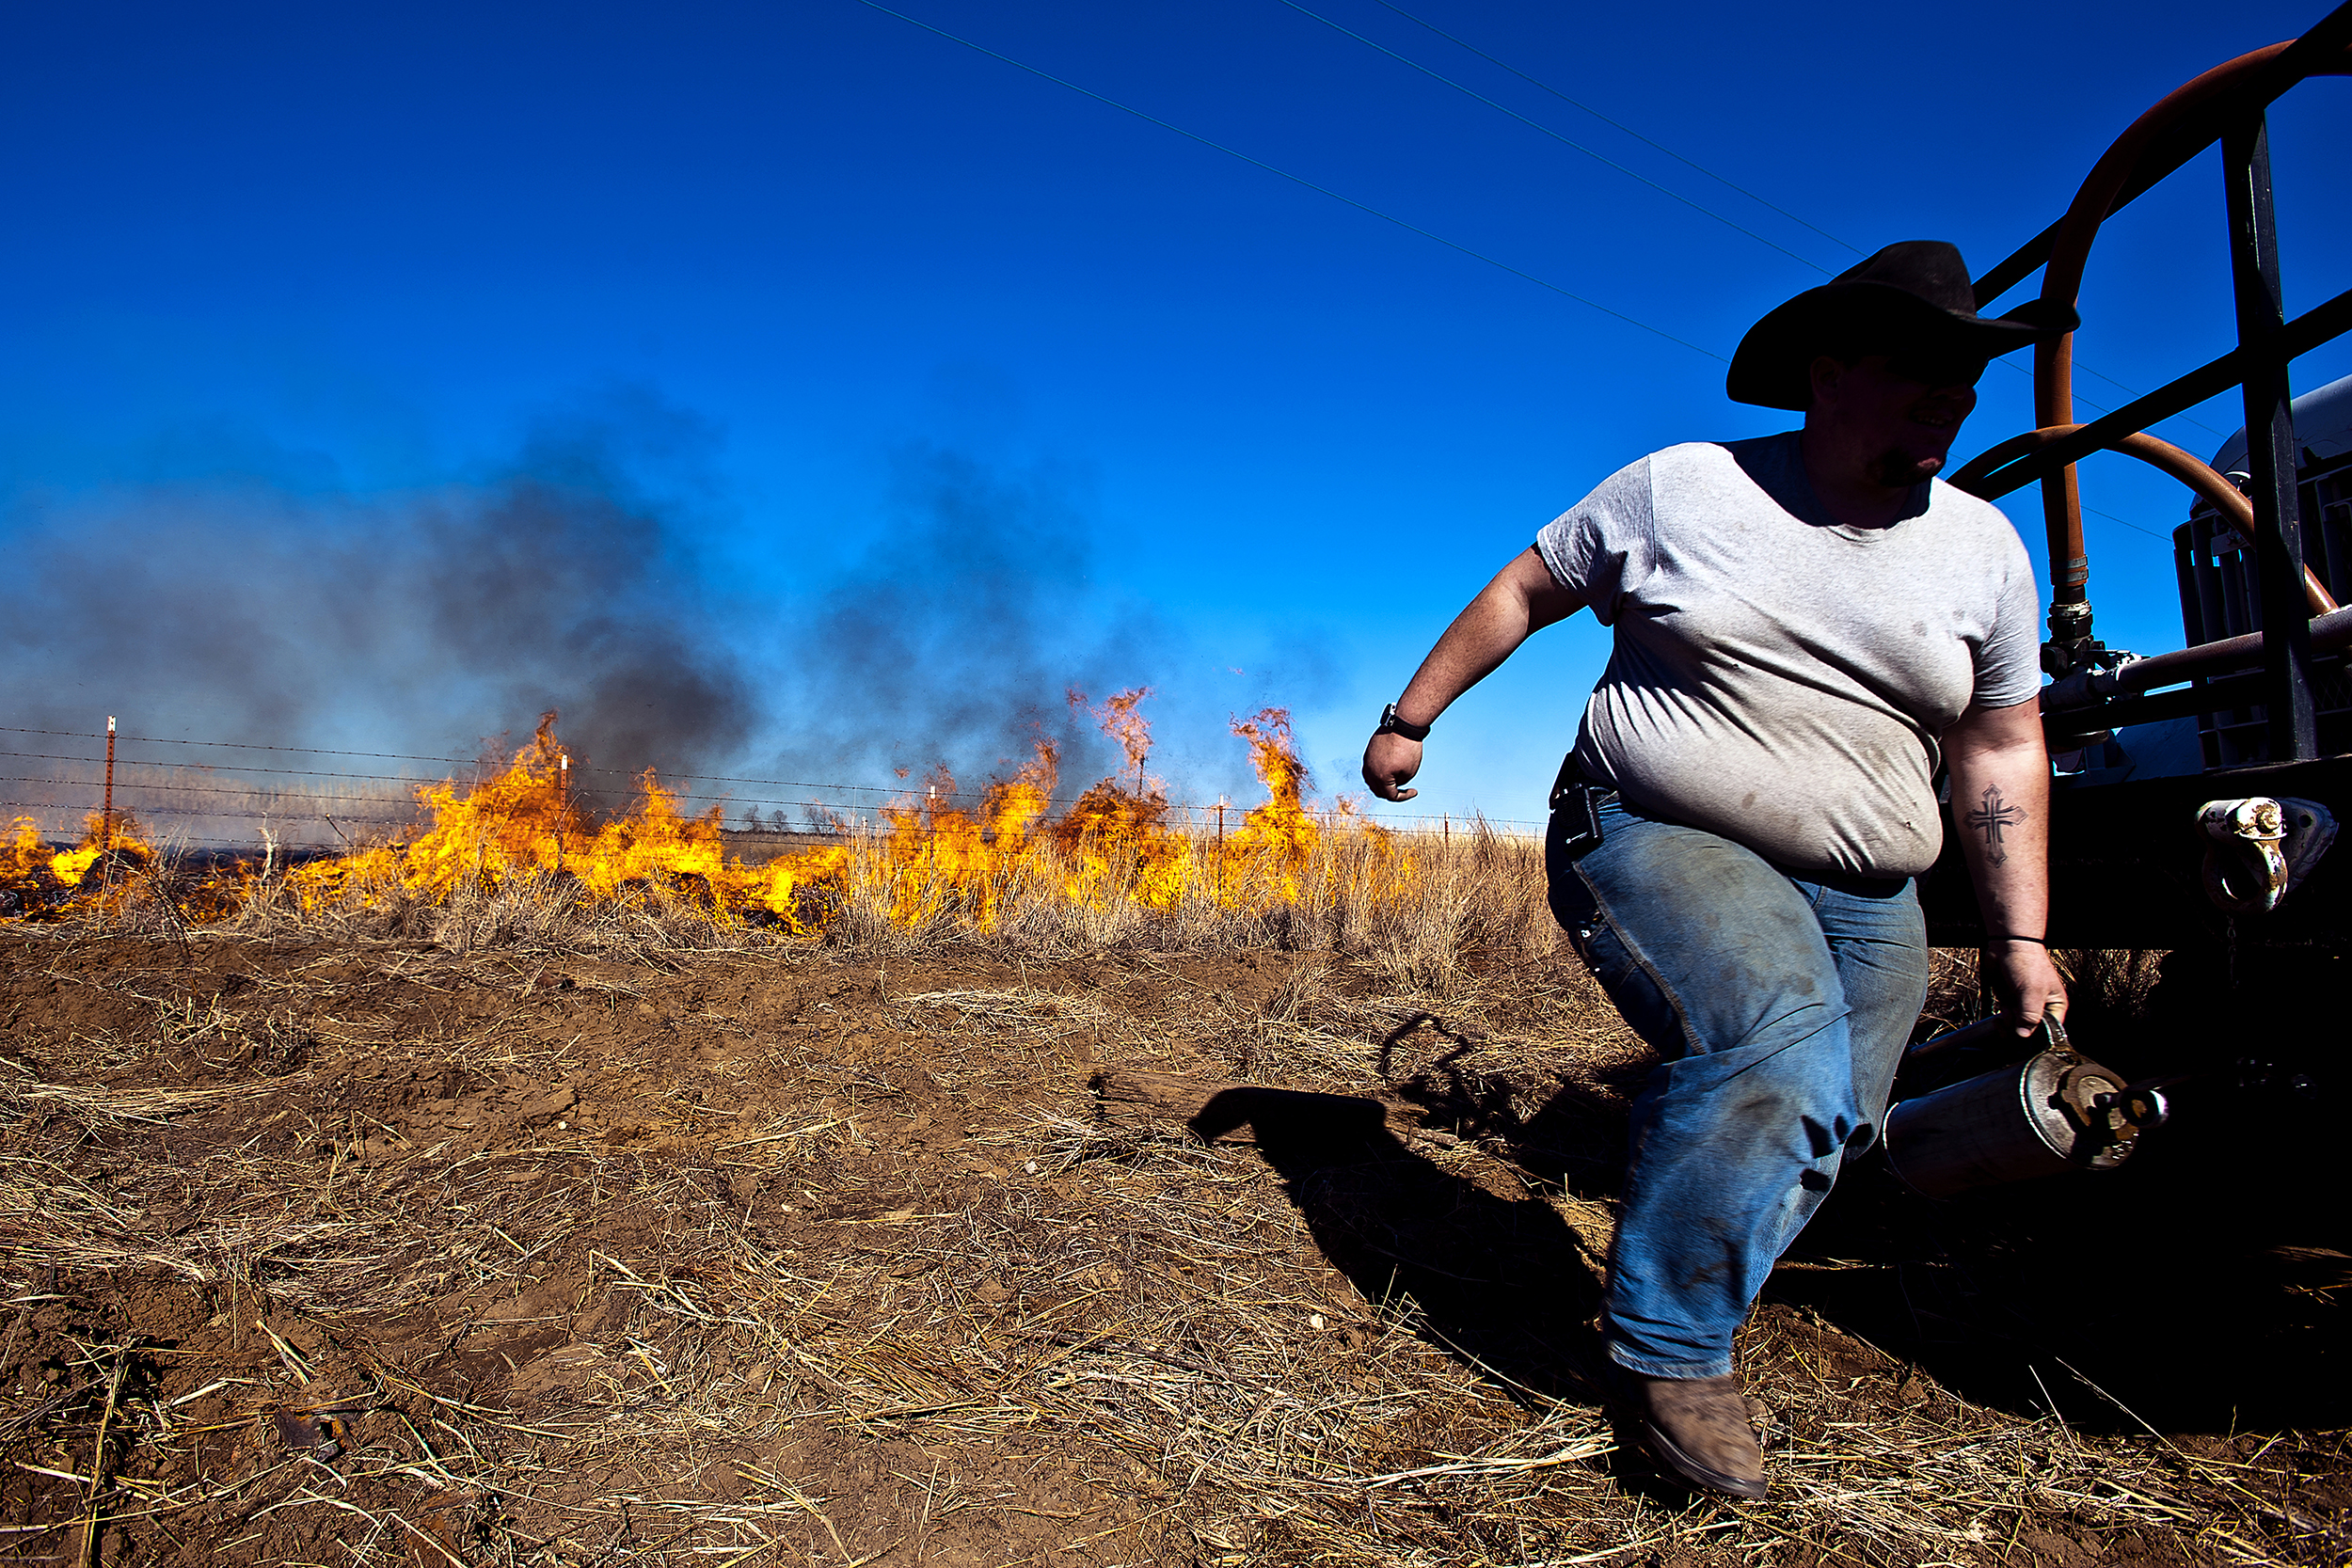  Yancey Heugatter runs to man a water hose as a salvage burn goes wild near Bowie, TX.  Several acres were left charred before firefighters from neighboring communities responded to extinguish the blaze. 